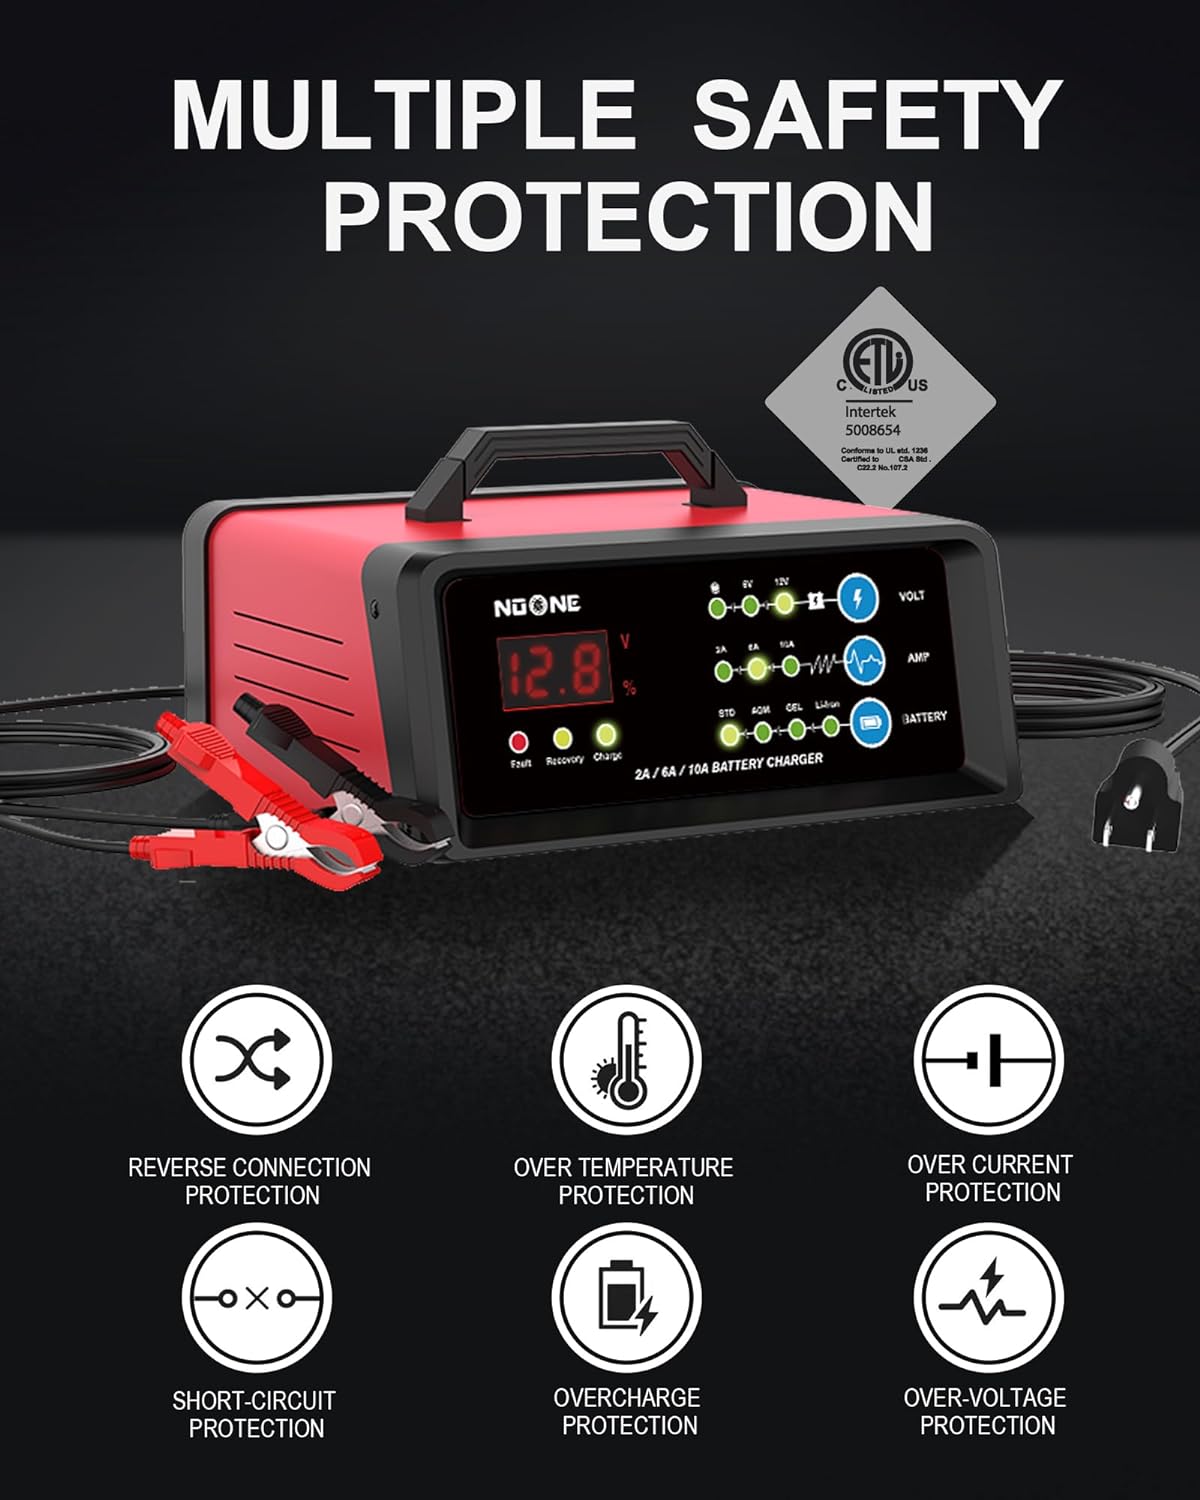 NOONE Car Battery Charger Review